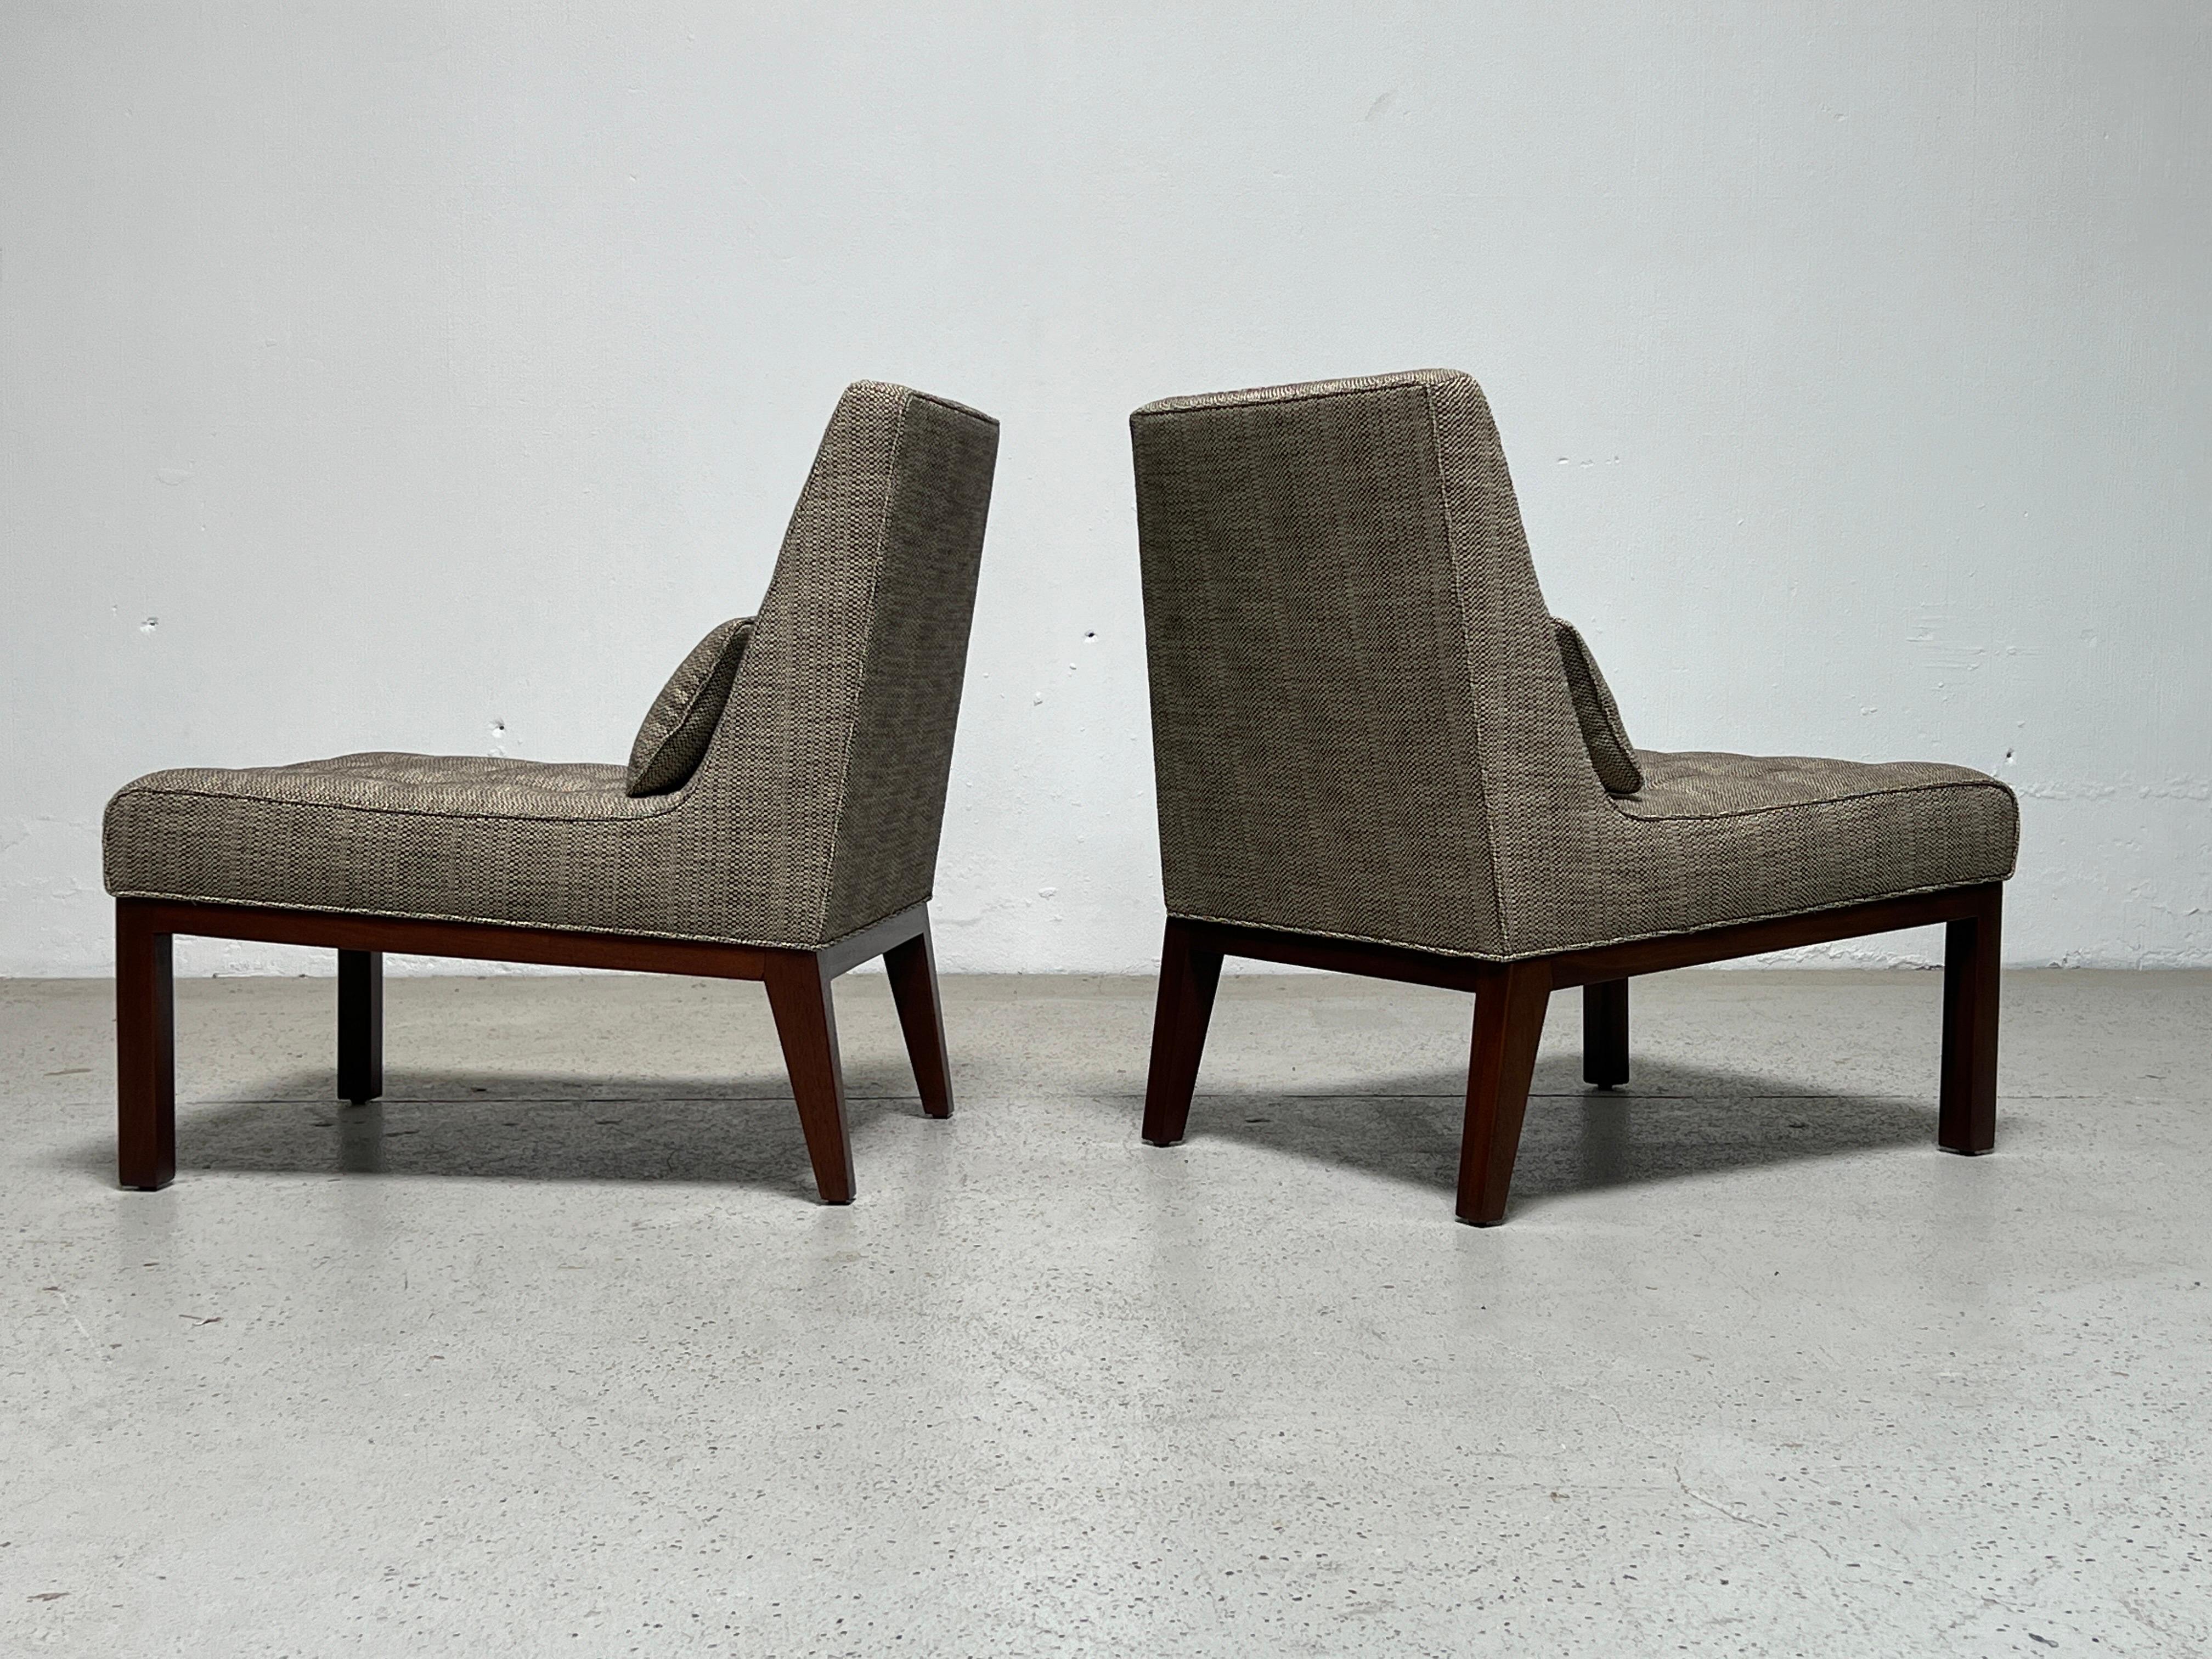 A pair of slipper chairs with mahogany bases. Designed by Edward Wormley for Dunbar.